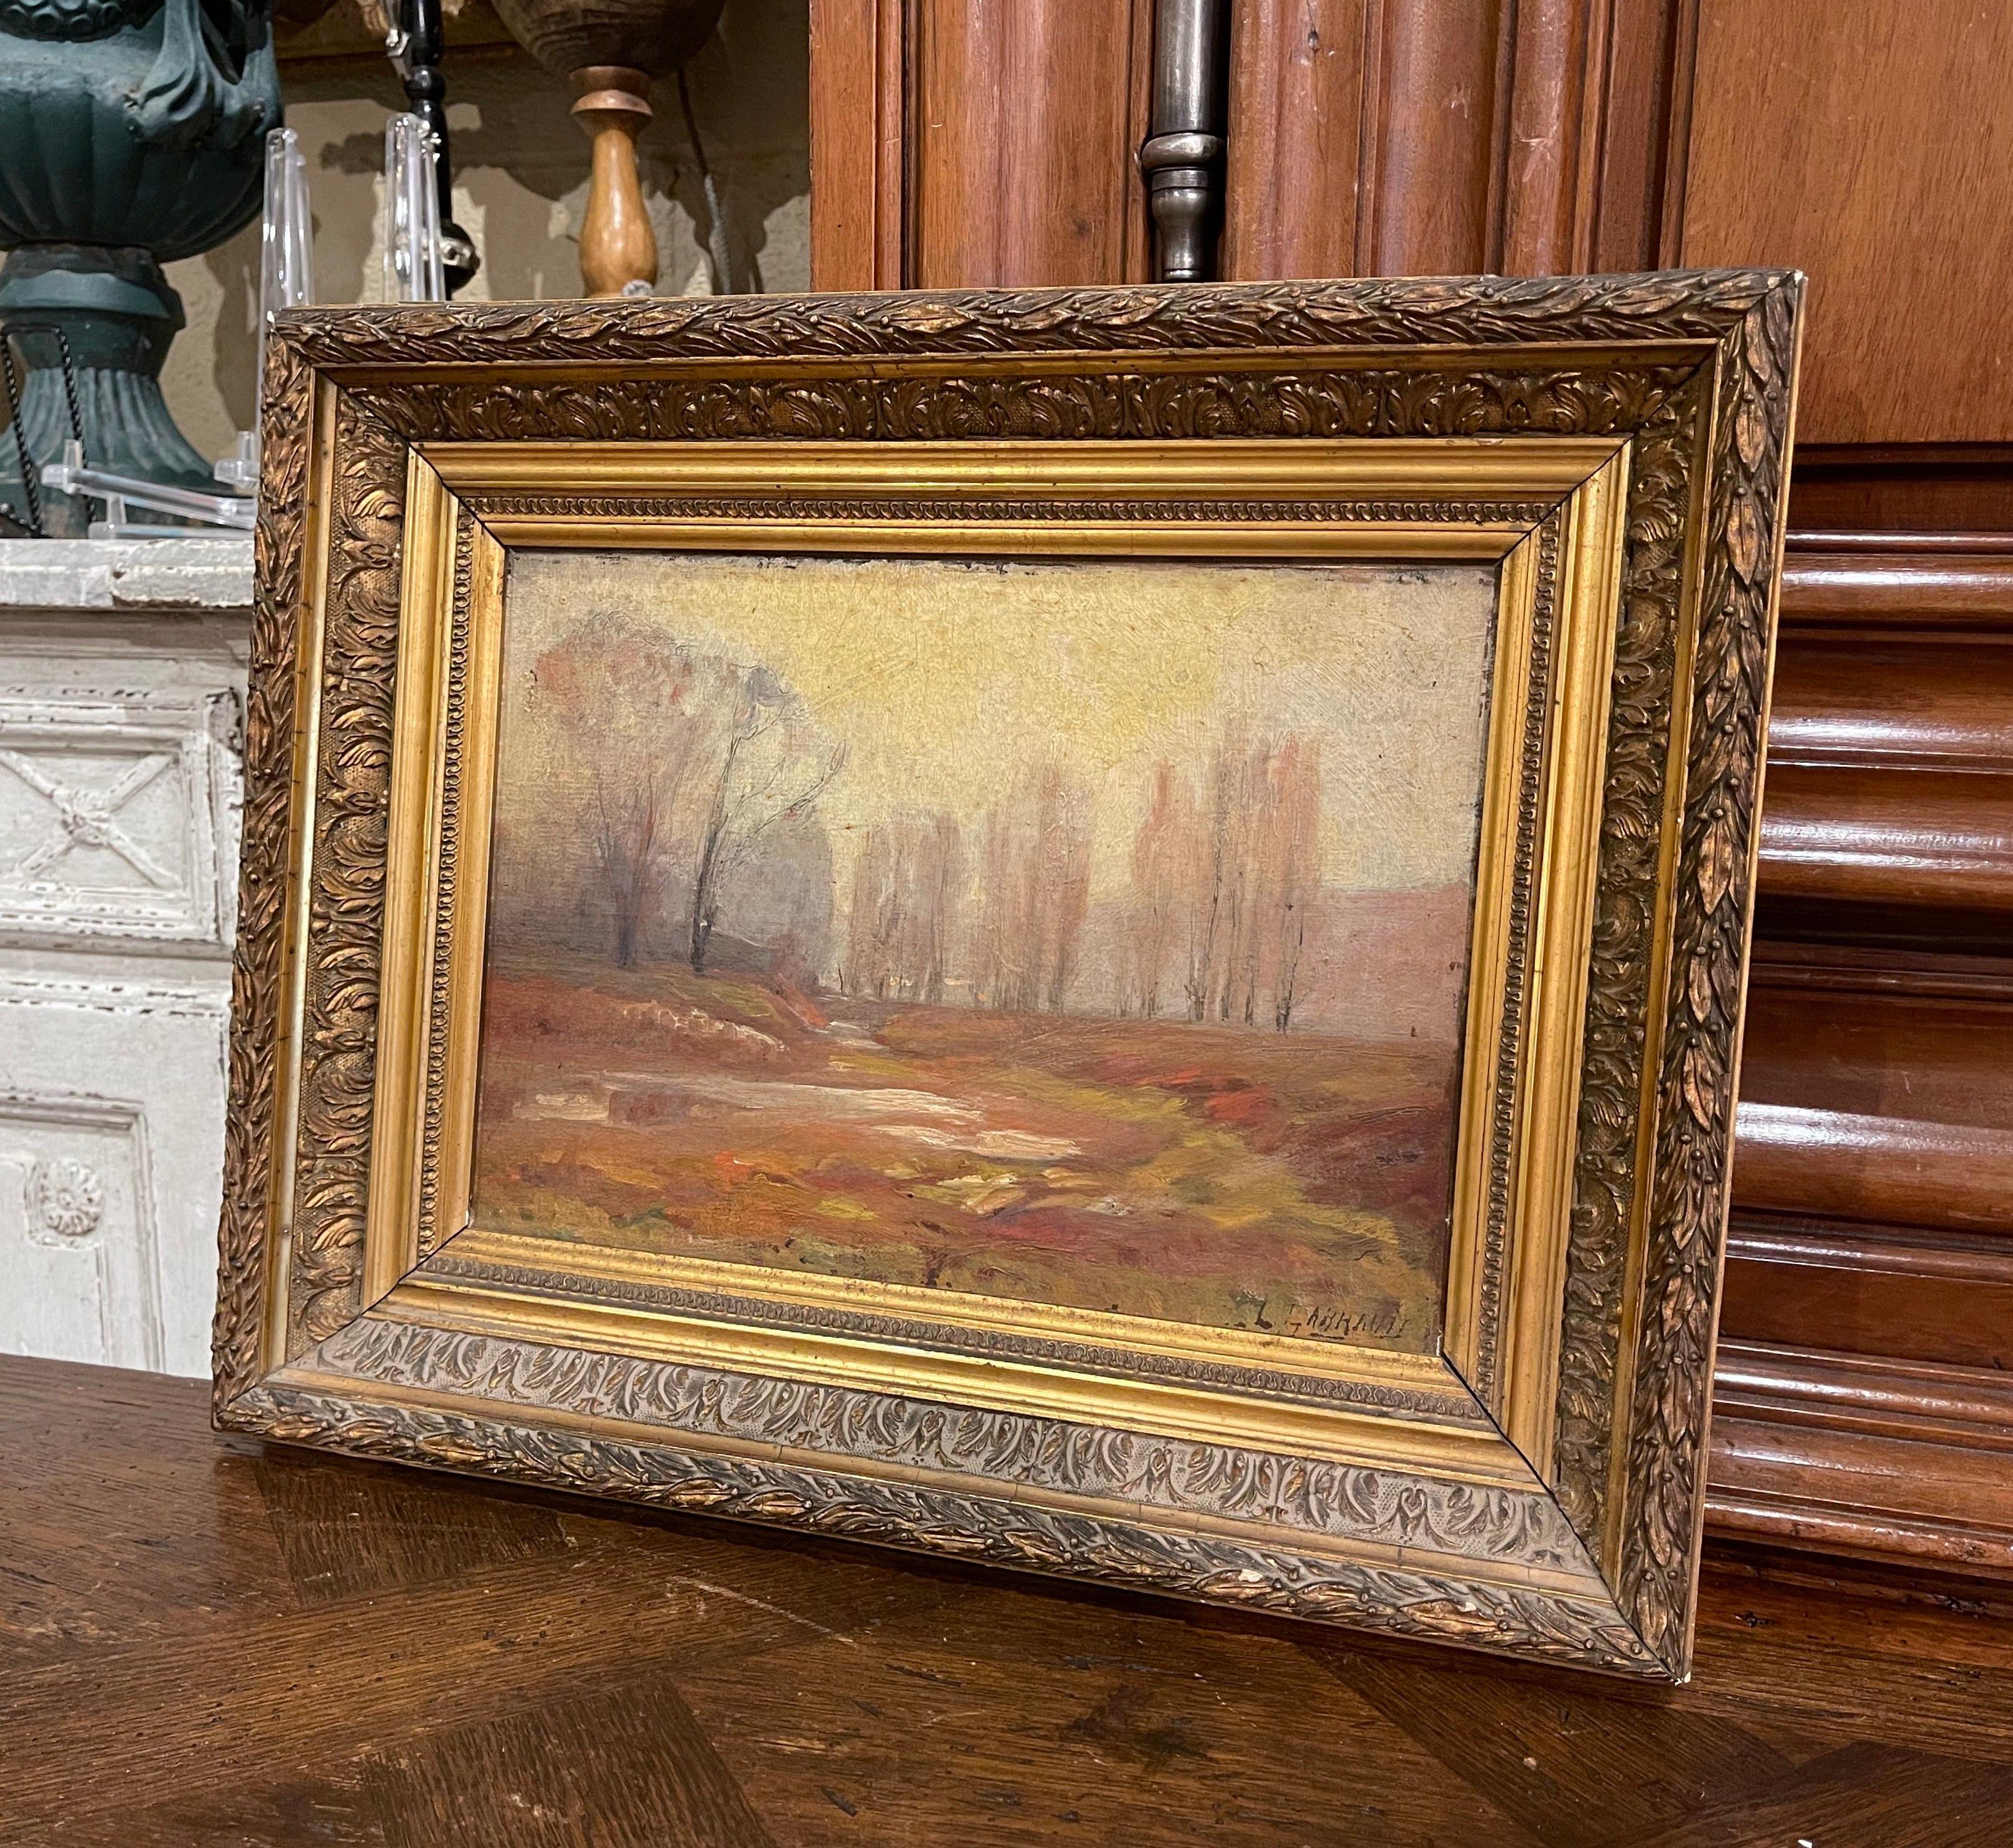 This charming antique Barbizon painting was created in France, circa 1880. Set in the original carved gilt frame, the artwork painted on board depicts a landscape scene with trees and river; it is signed on the bottom right corner by the artist, L.